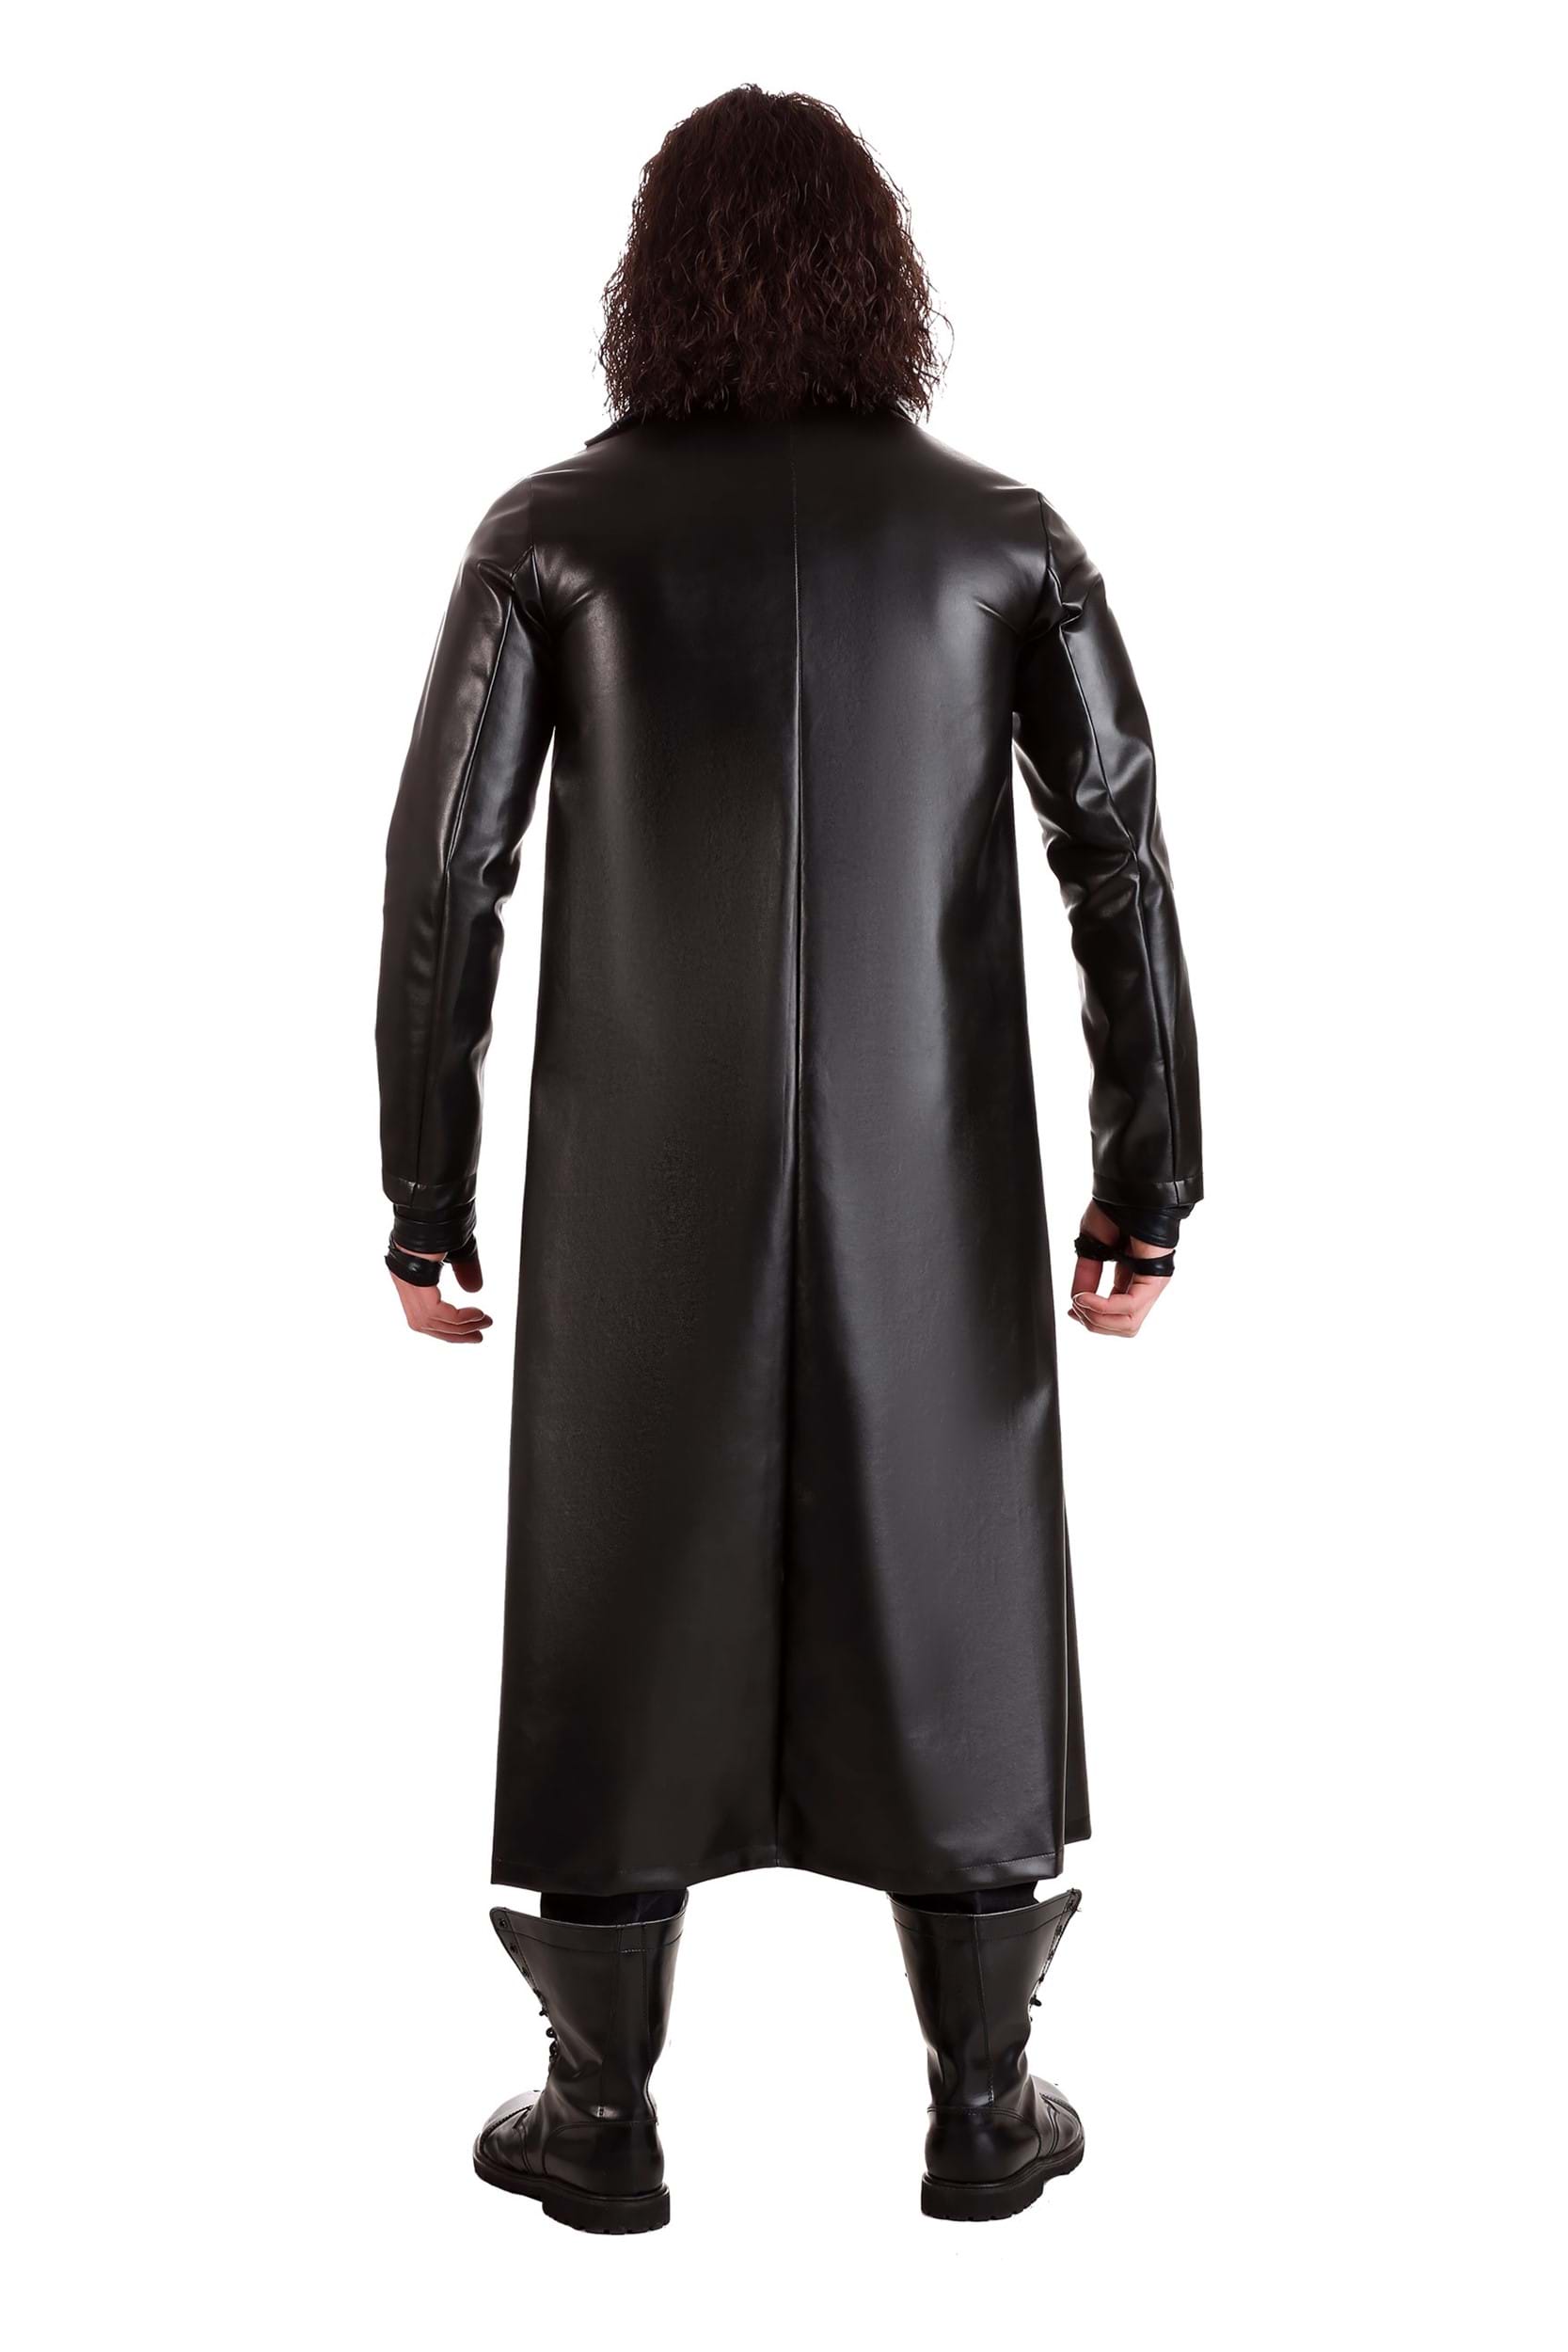 The Crow Fancy Dress Costume For Men